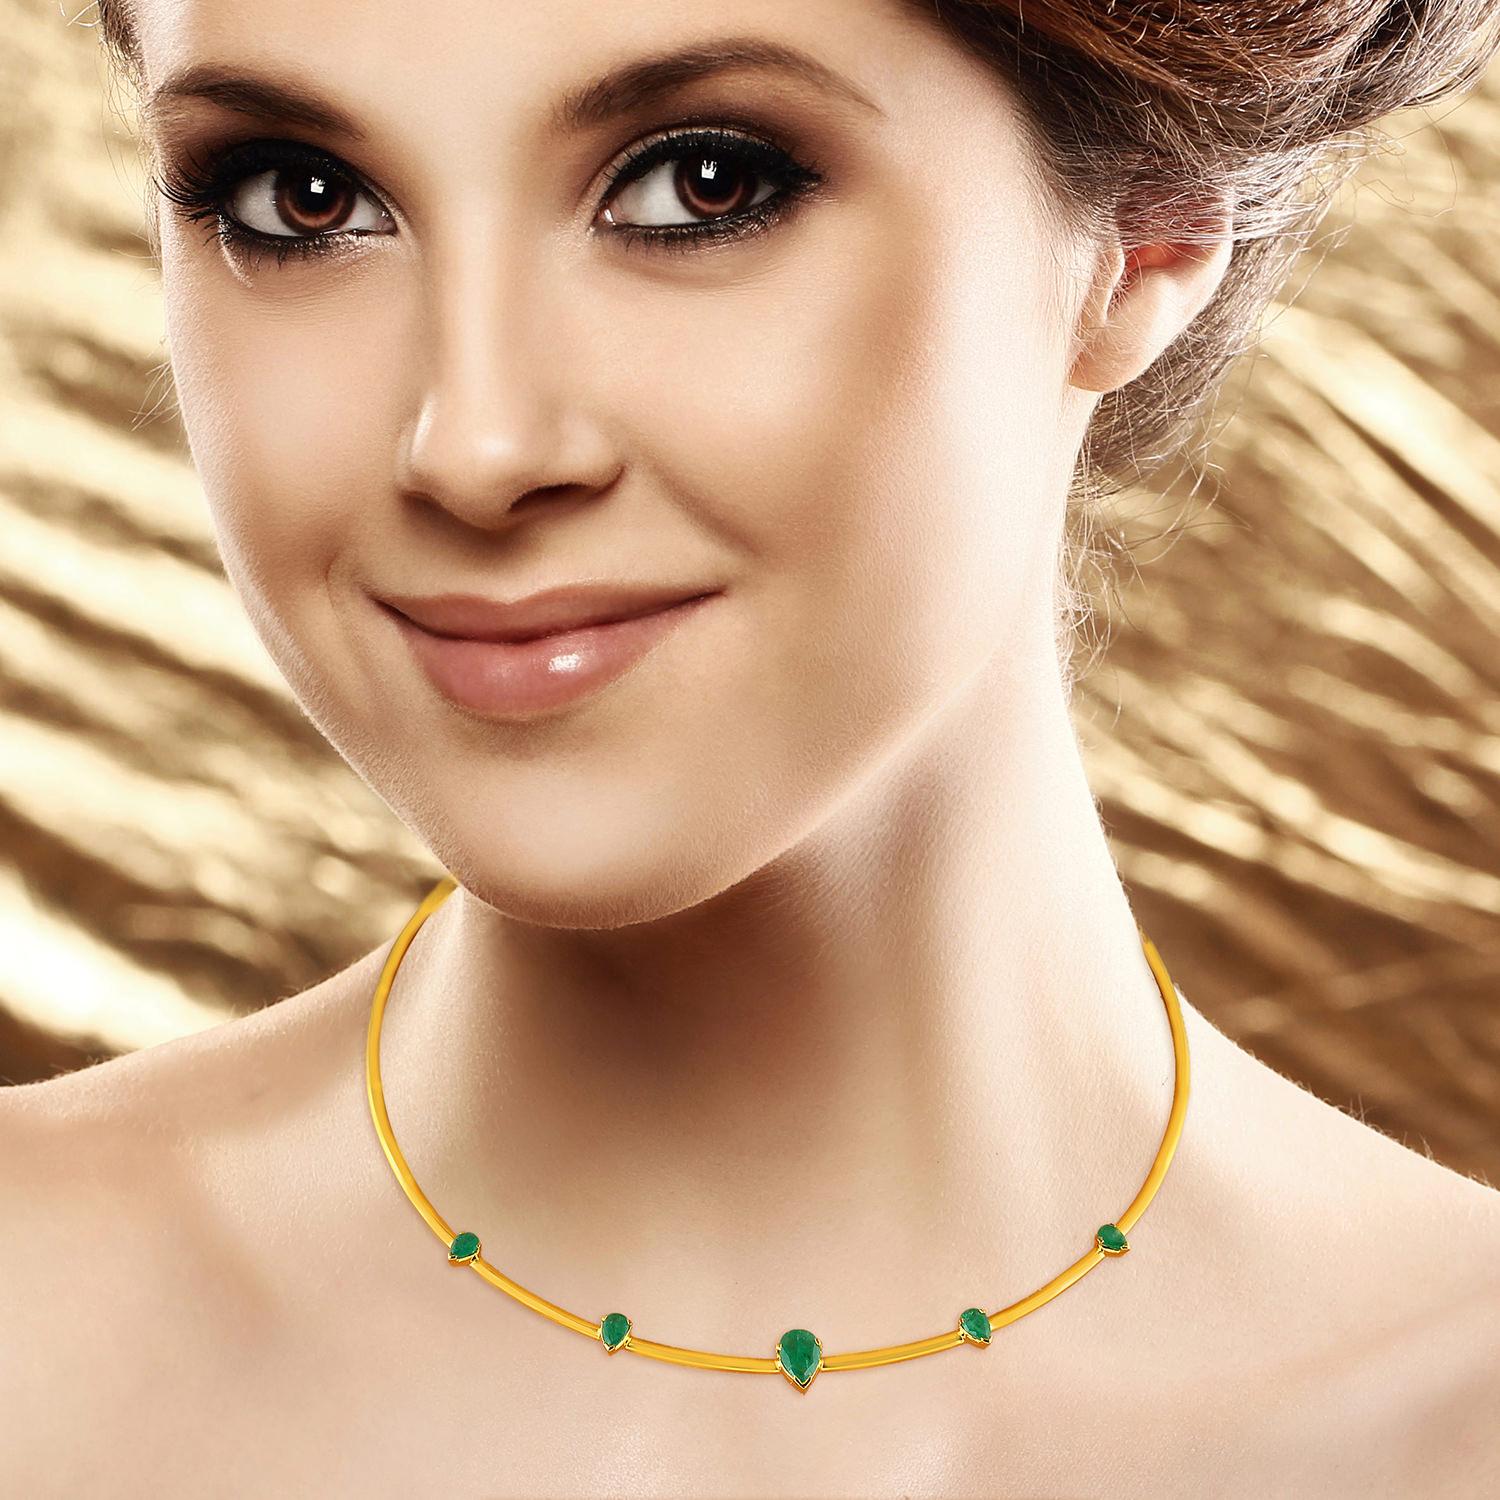 Cast in 18 karat yellow gold, this stunning choker necklace is set in alluring 2.45 carats of emeralds.

FOLLOW  MEGHNA JEWELS storefront to view the latest collection & exclusive pieces.  Meghna Jewels is proudly rated as a Top Seller on 1stdibs